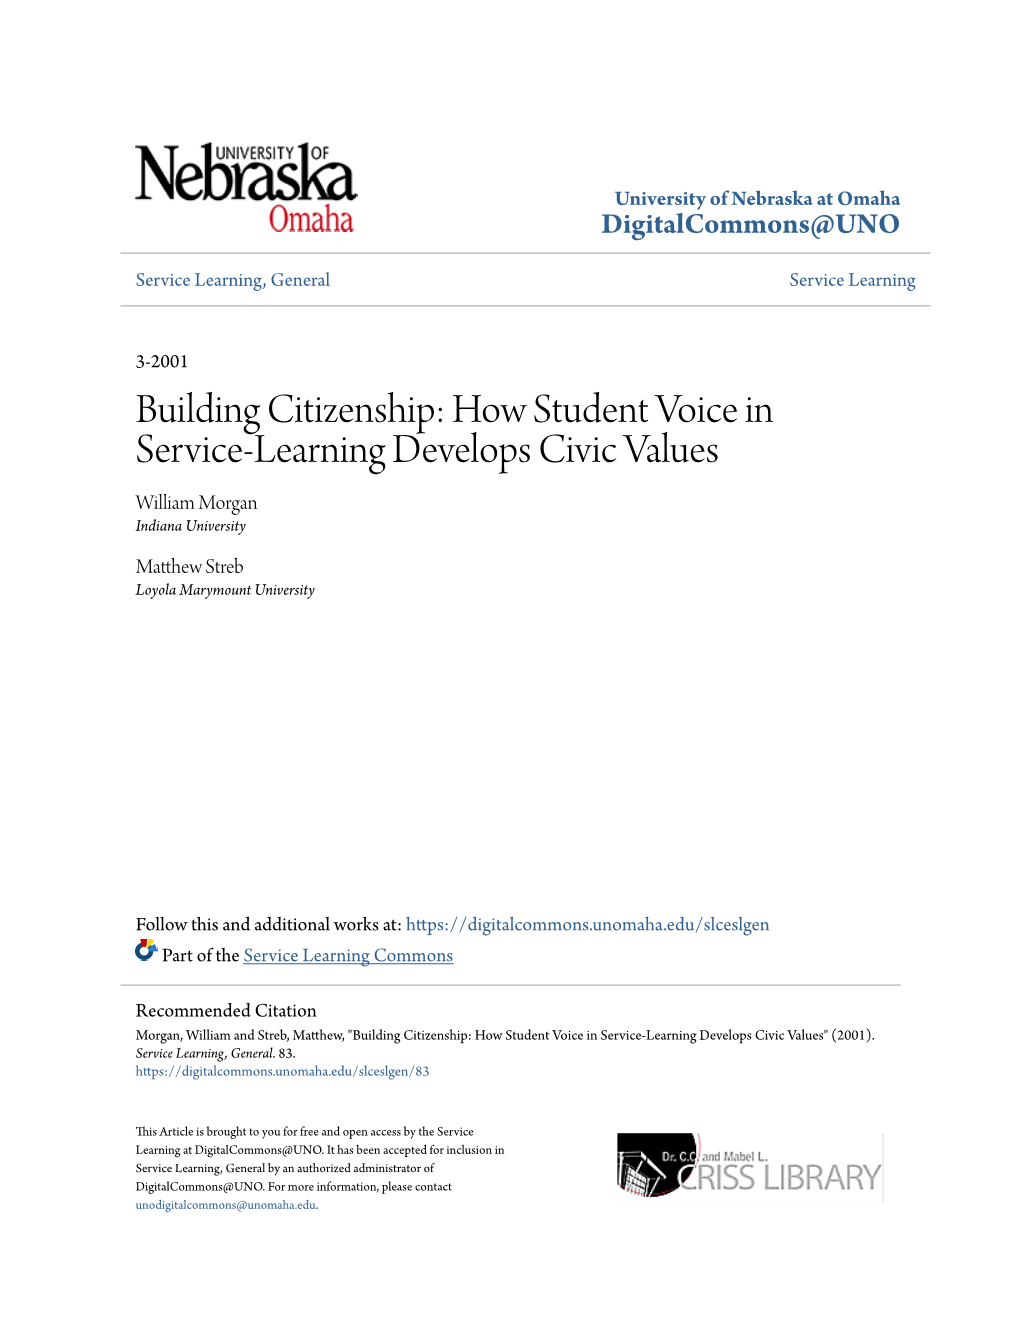 Building Citizenship: How Student Voice in Service-Learning Develops Civic Values William Morgan Indiana University